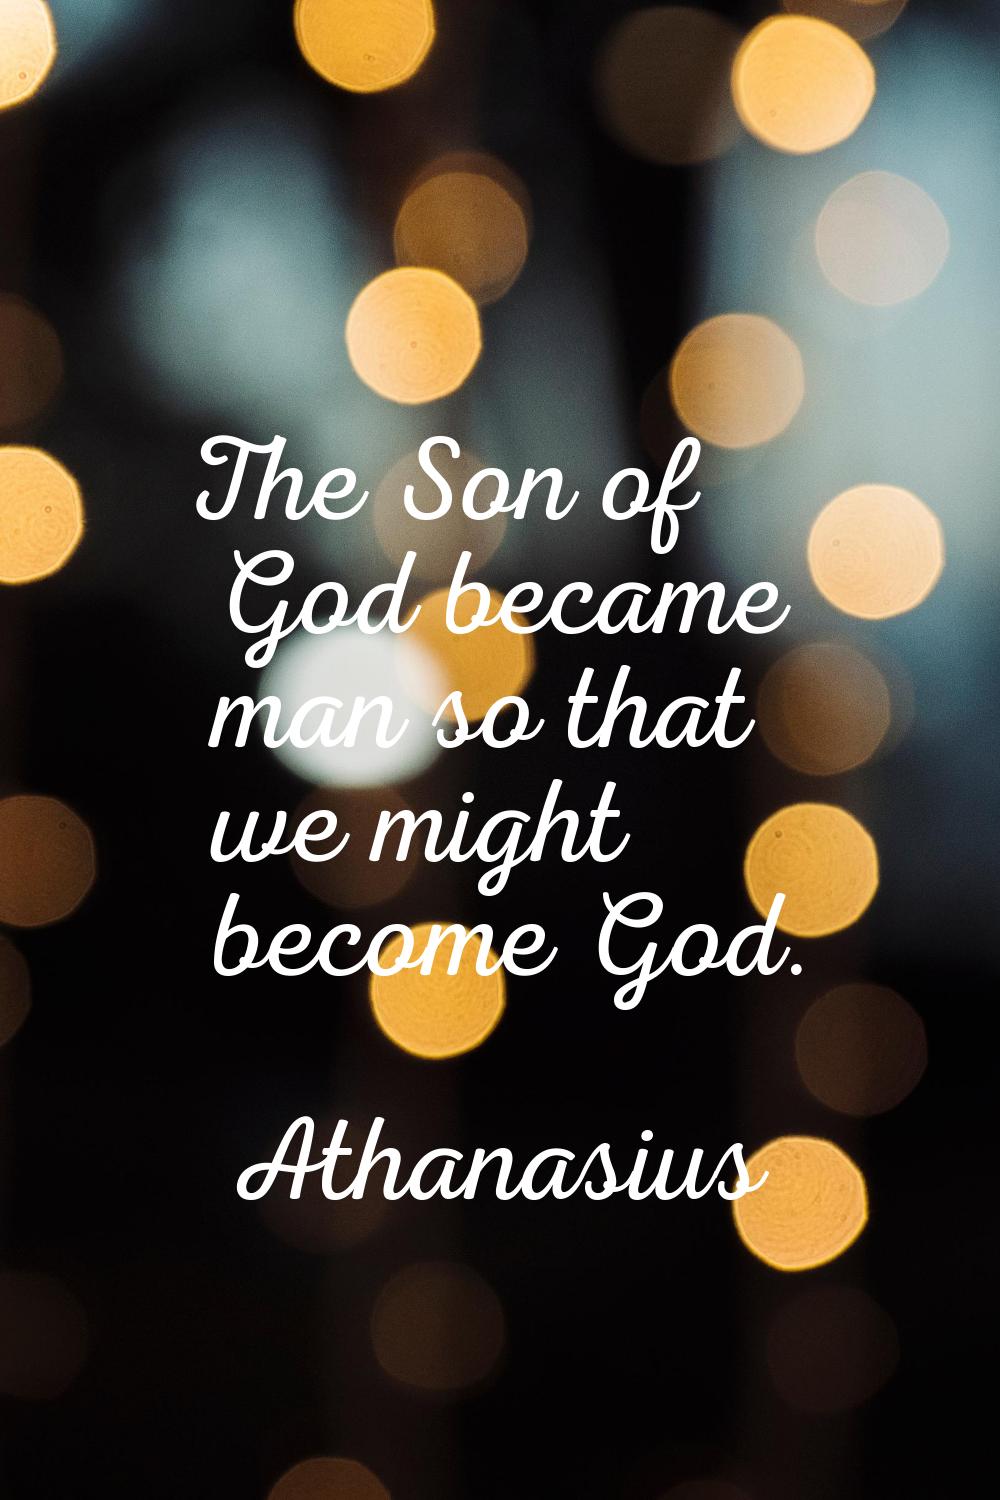 The Son of God became man so that we might become God.